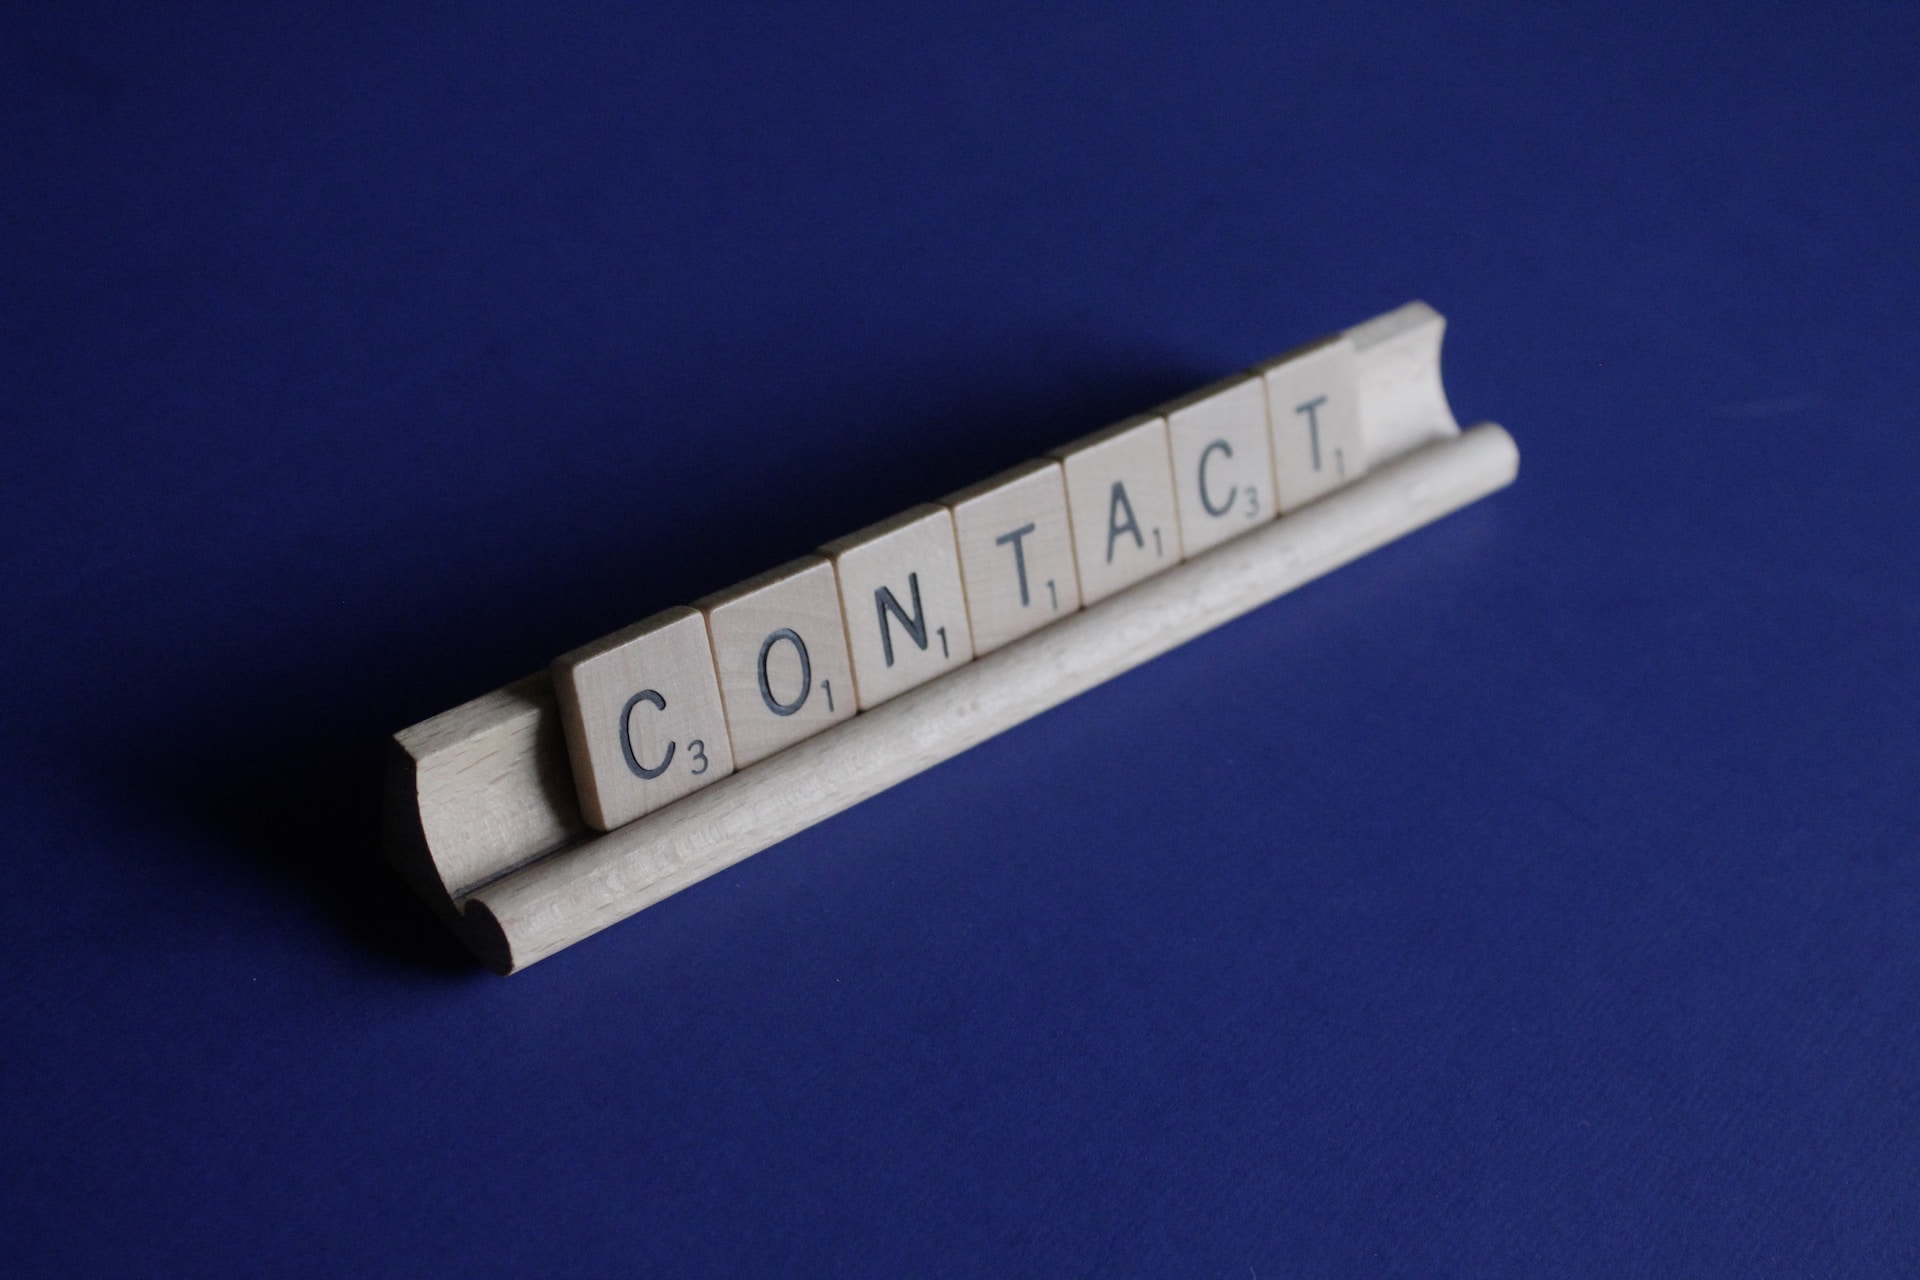 Scrabble rack showing the word Contact